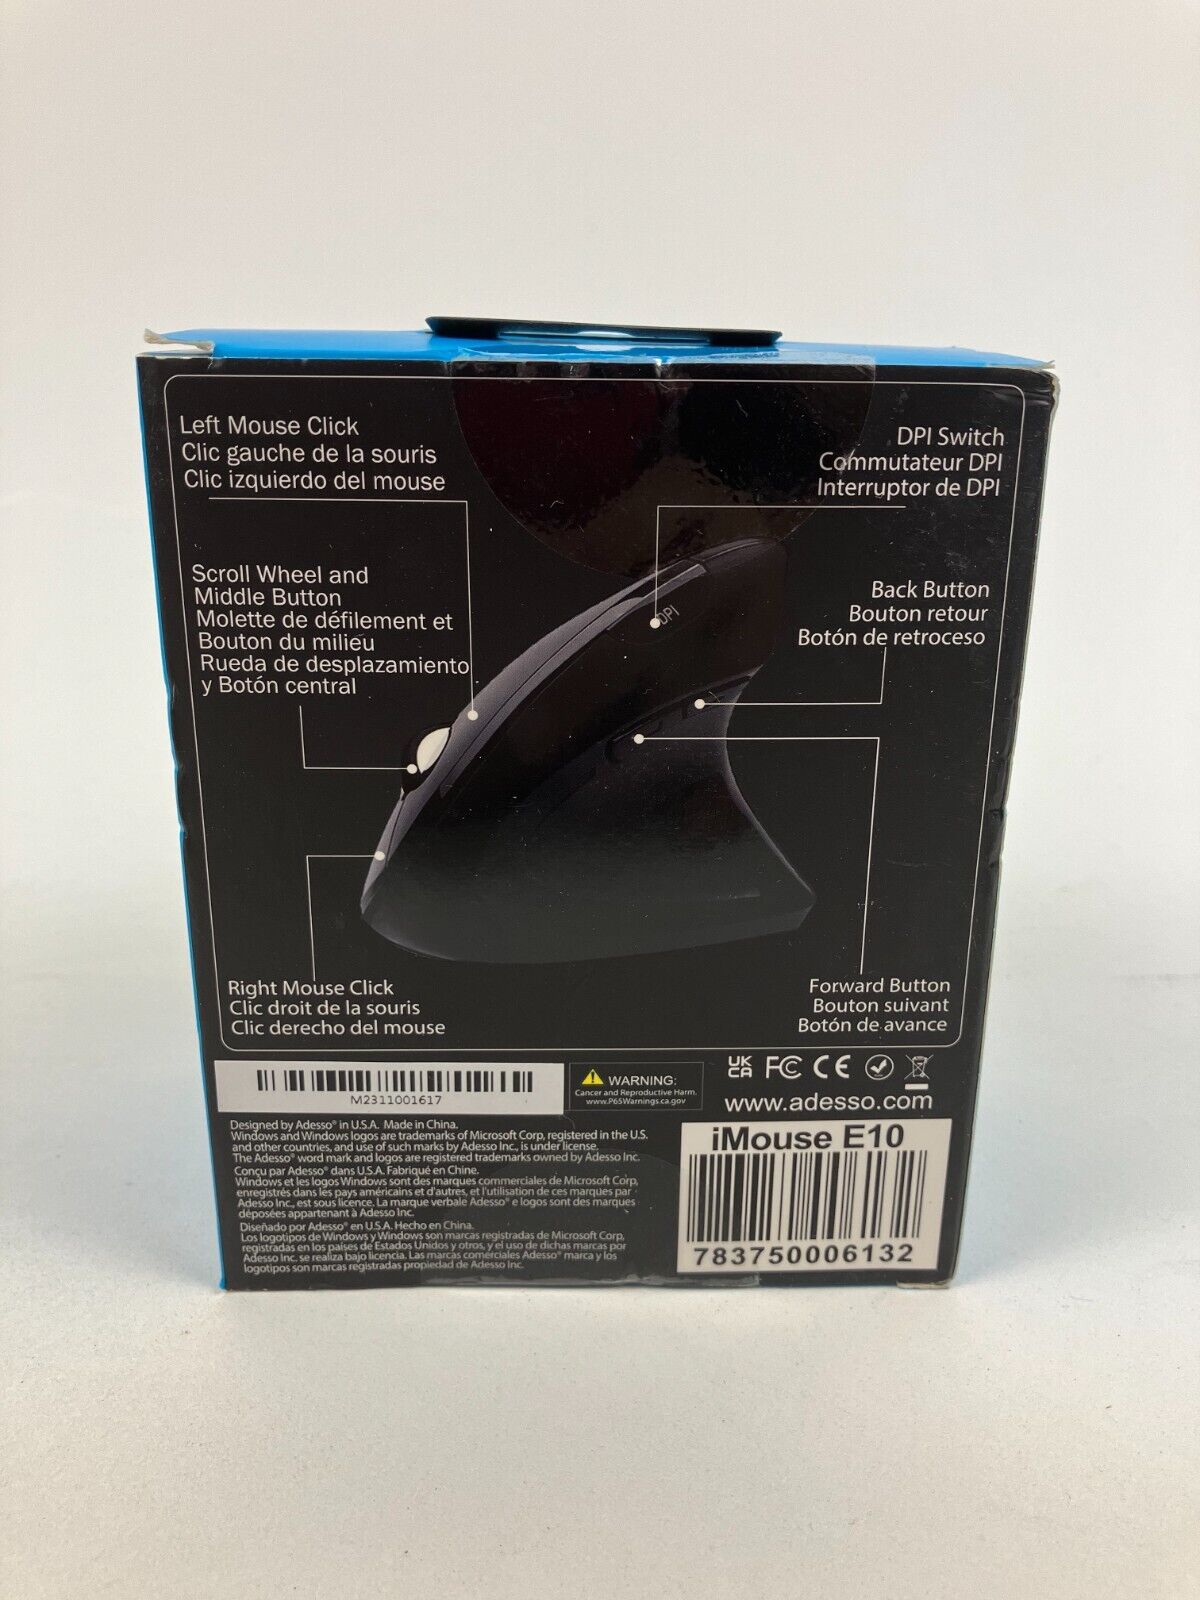 BRAND NEW Adesso iMouse E10 2.4ghz RF Wireless Vertical Ergonomic Mouse SEALED